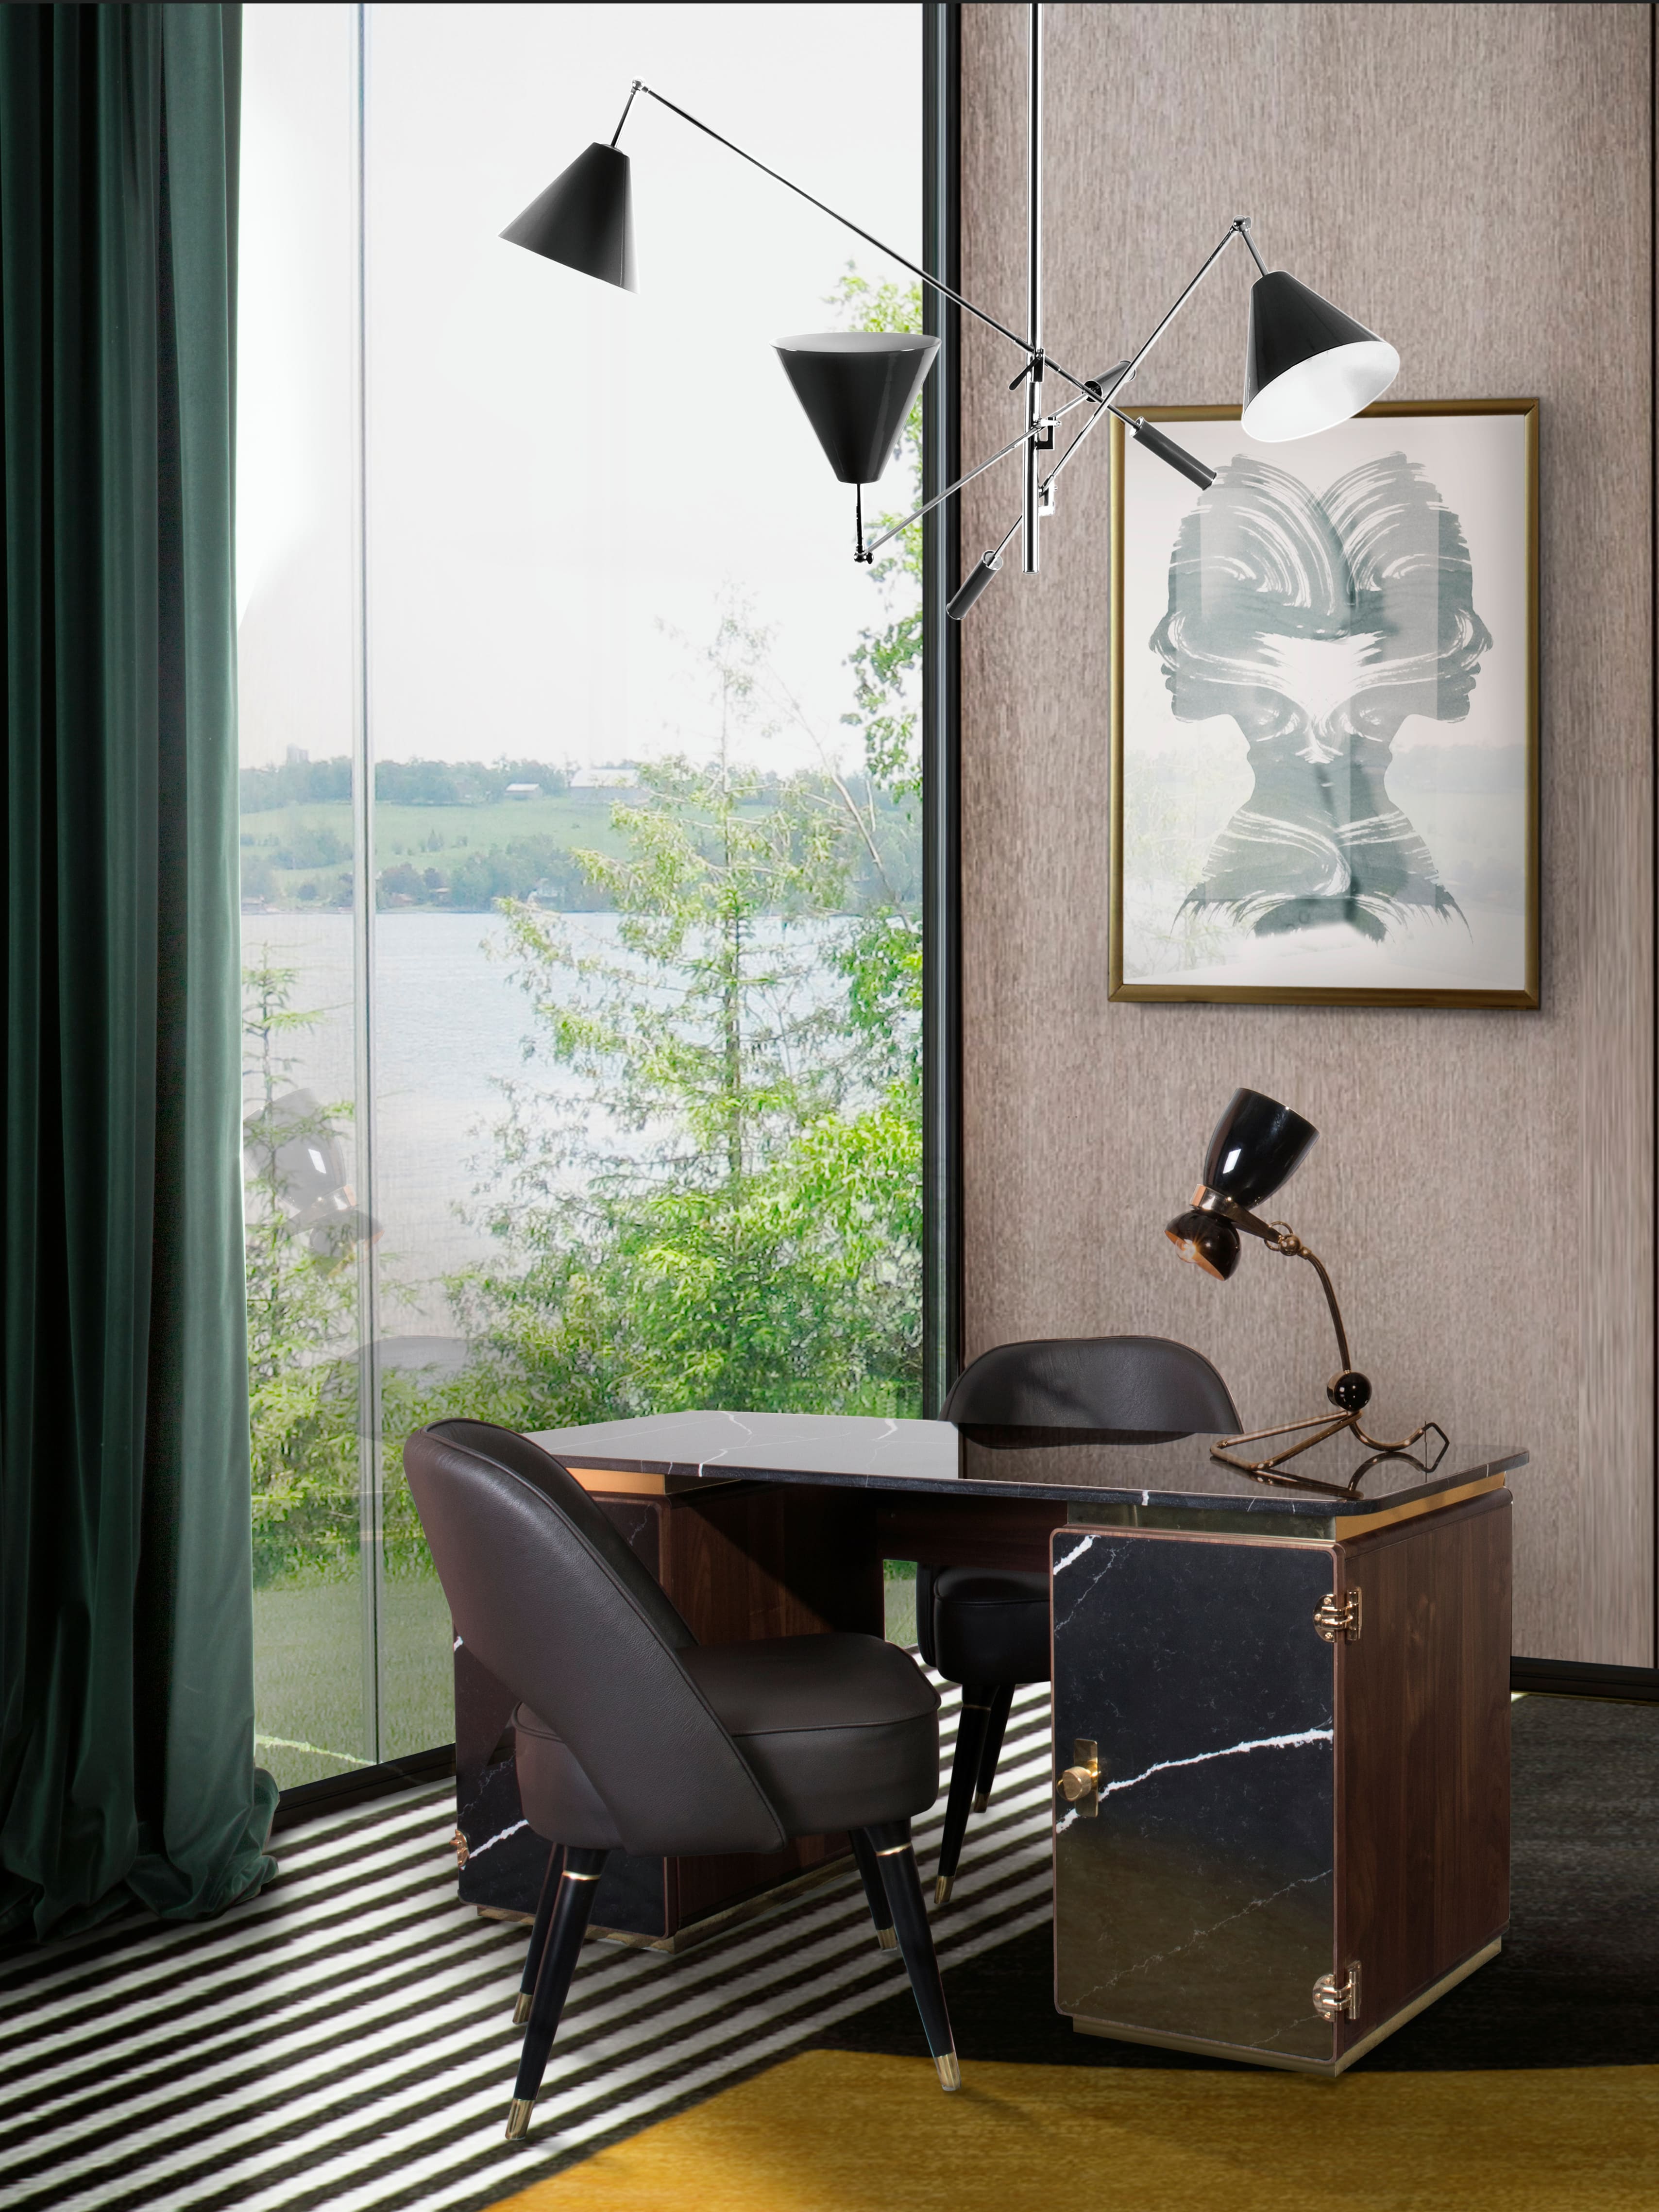 Nature-Friendly Contemporary Home Office Decor - Home'Society